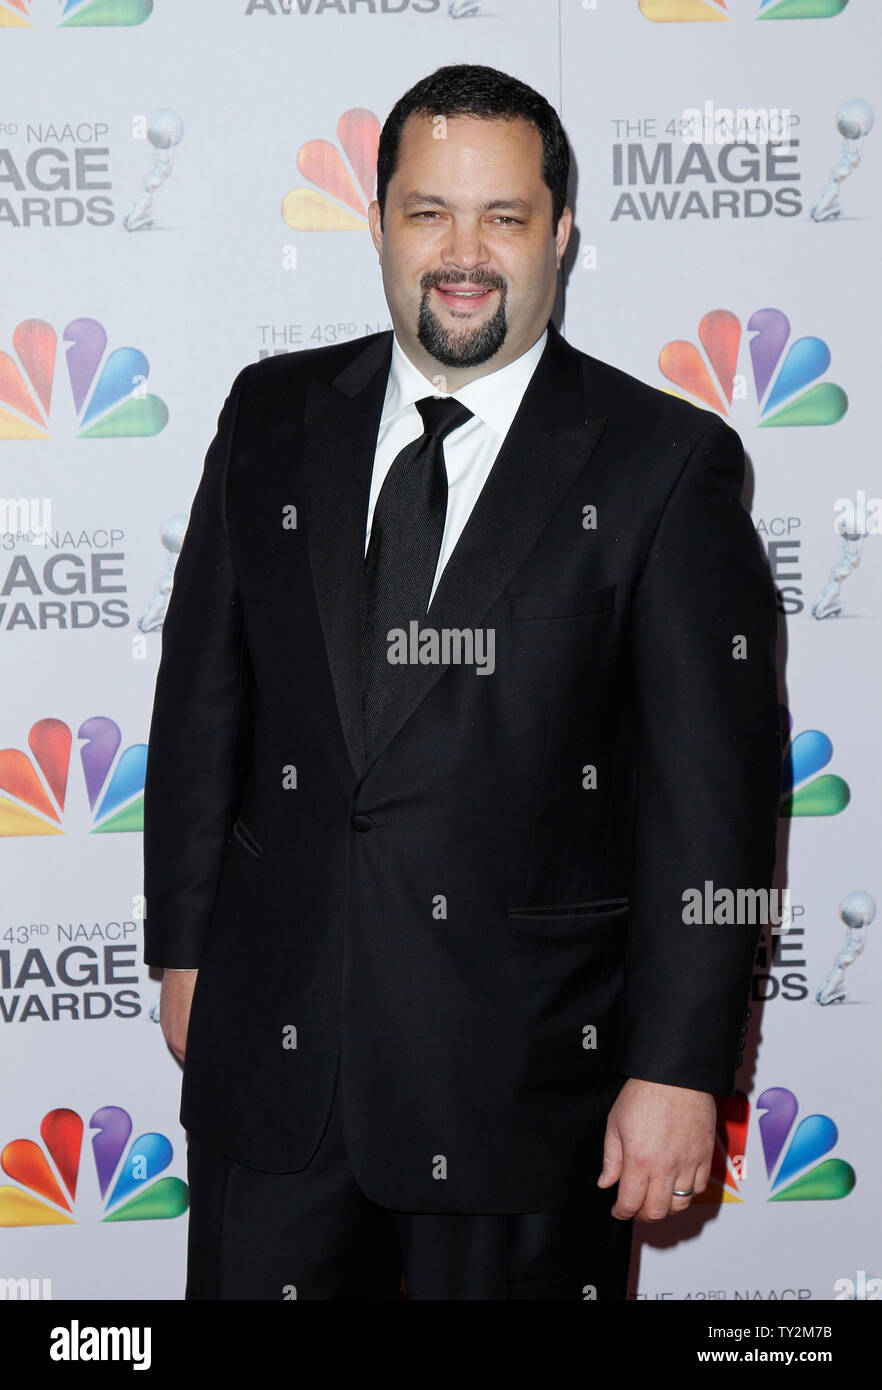 NAACP President and CEO Benjamin Todd Jealous arrives at the 43rd NAACP Image Awards at the Shrine Auditorium in Los Angeles on February 17, 2012.  UPI/Danny Moloshok Stock Photo